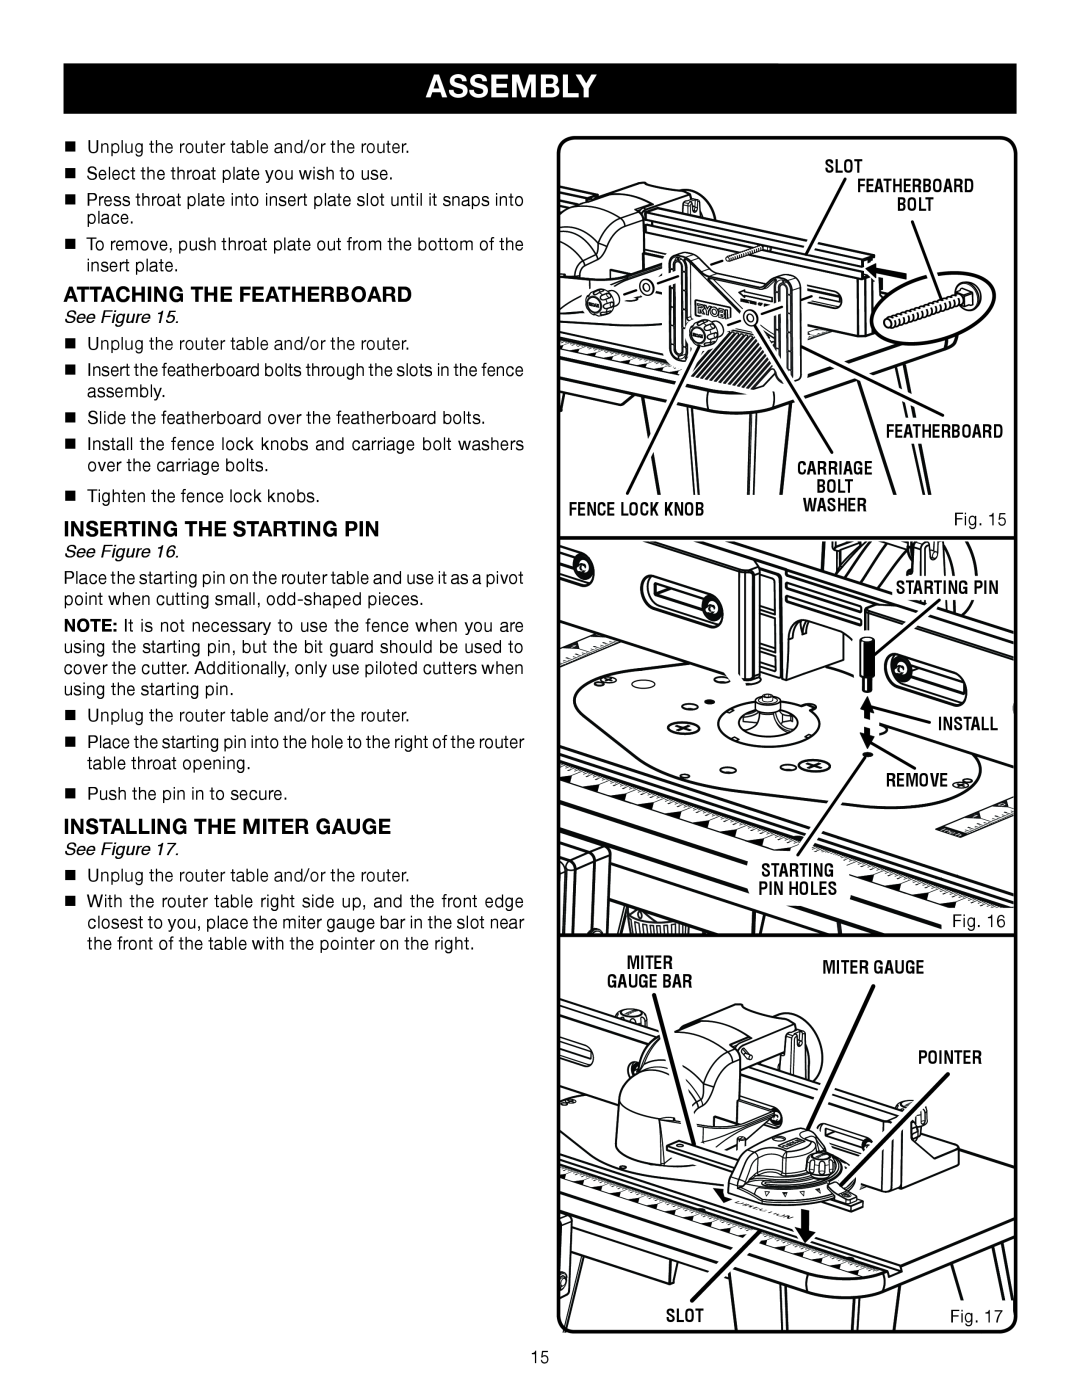 Ryobi A25RT02 Attaching The Featherboard, Inserting The Starting Pin, Installing The Miter Gauge, Assembly, See Figure 